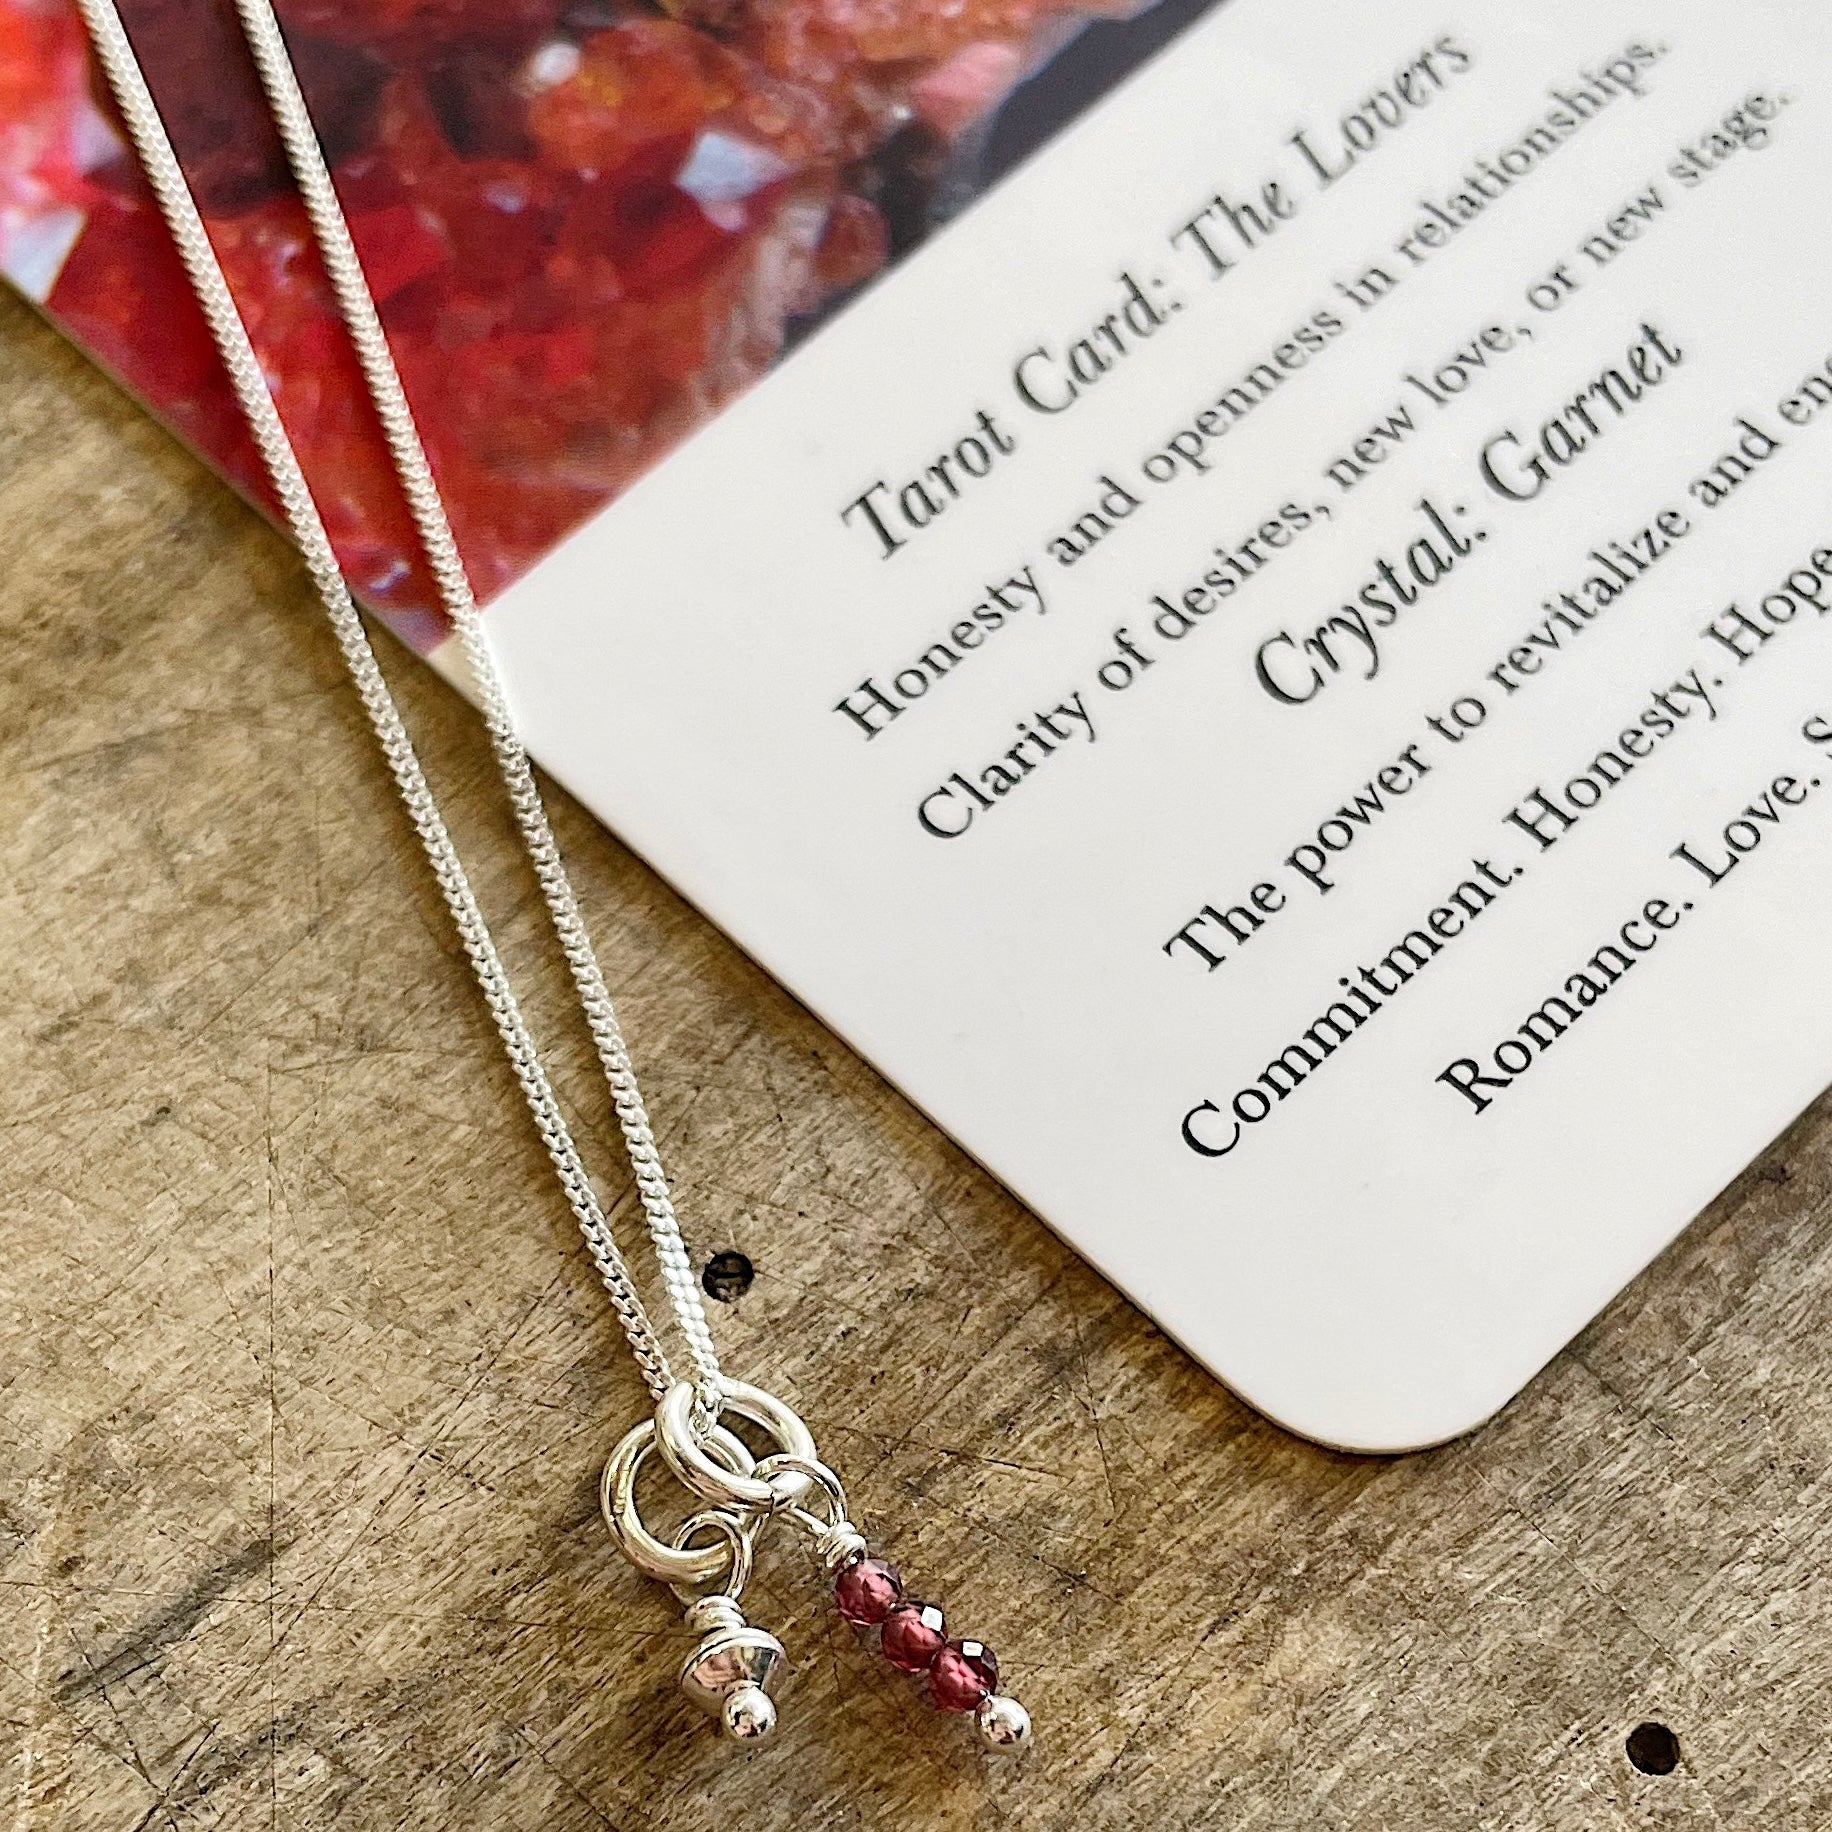 Three Of Cups // Tarot Necklace VI The Lovers Garnet and Sterling Silver